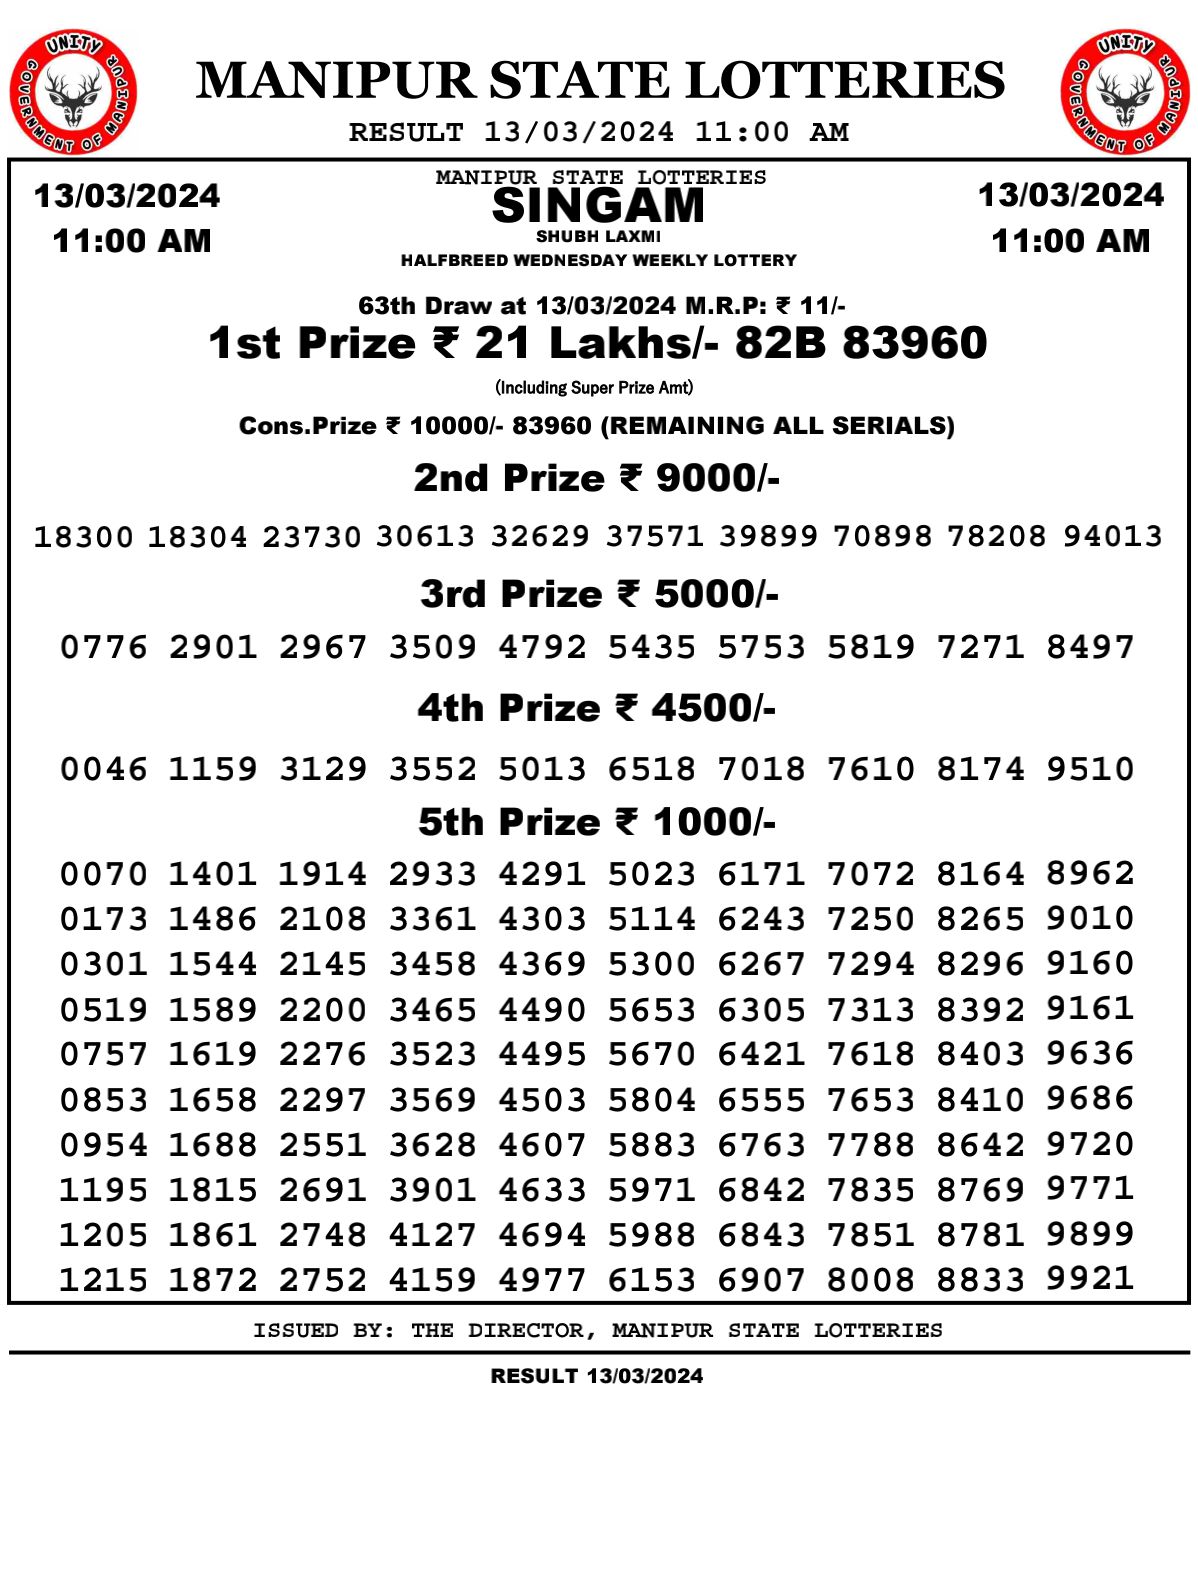 DEAR GODAVARI TUESDAY WEEKLY DRAW TIME 1 PM ONWARDS DRAW DATE 23.01.2024  NAGALAND STATE LOTTERIES - YouTube